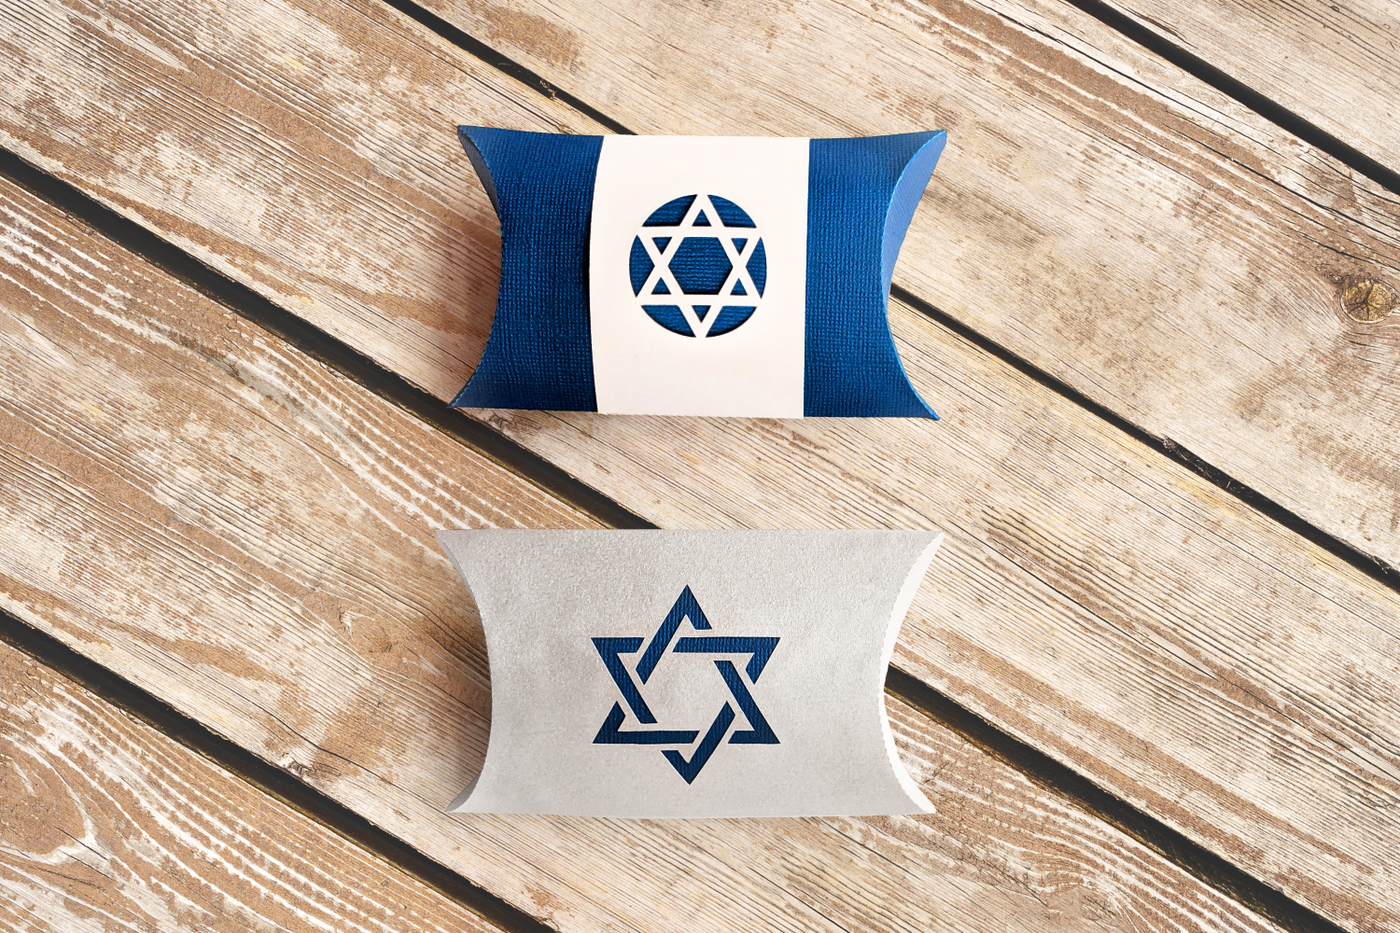 Pair of pillow boxes that have a Star of David motif.